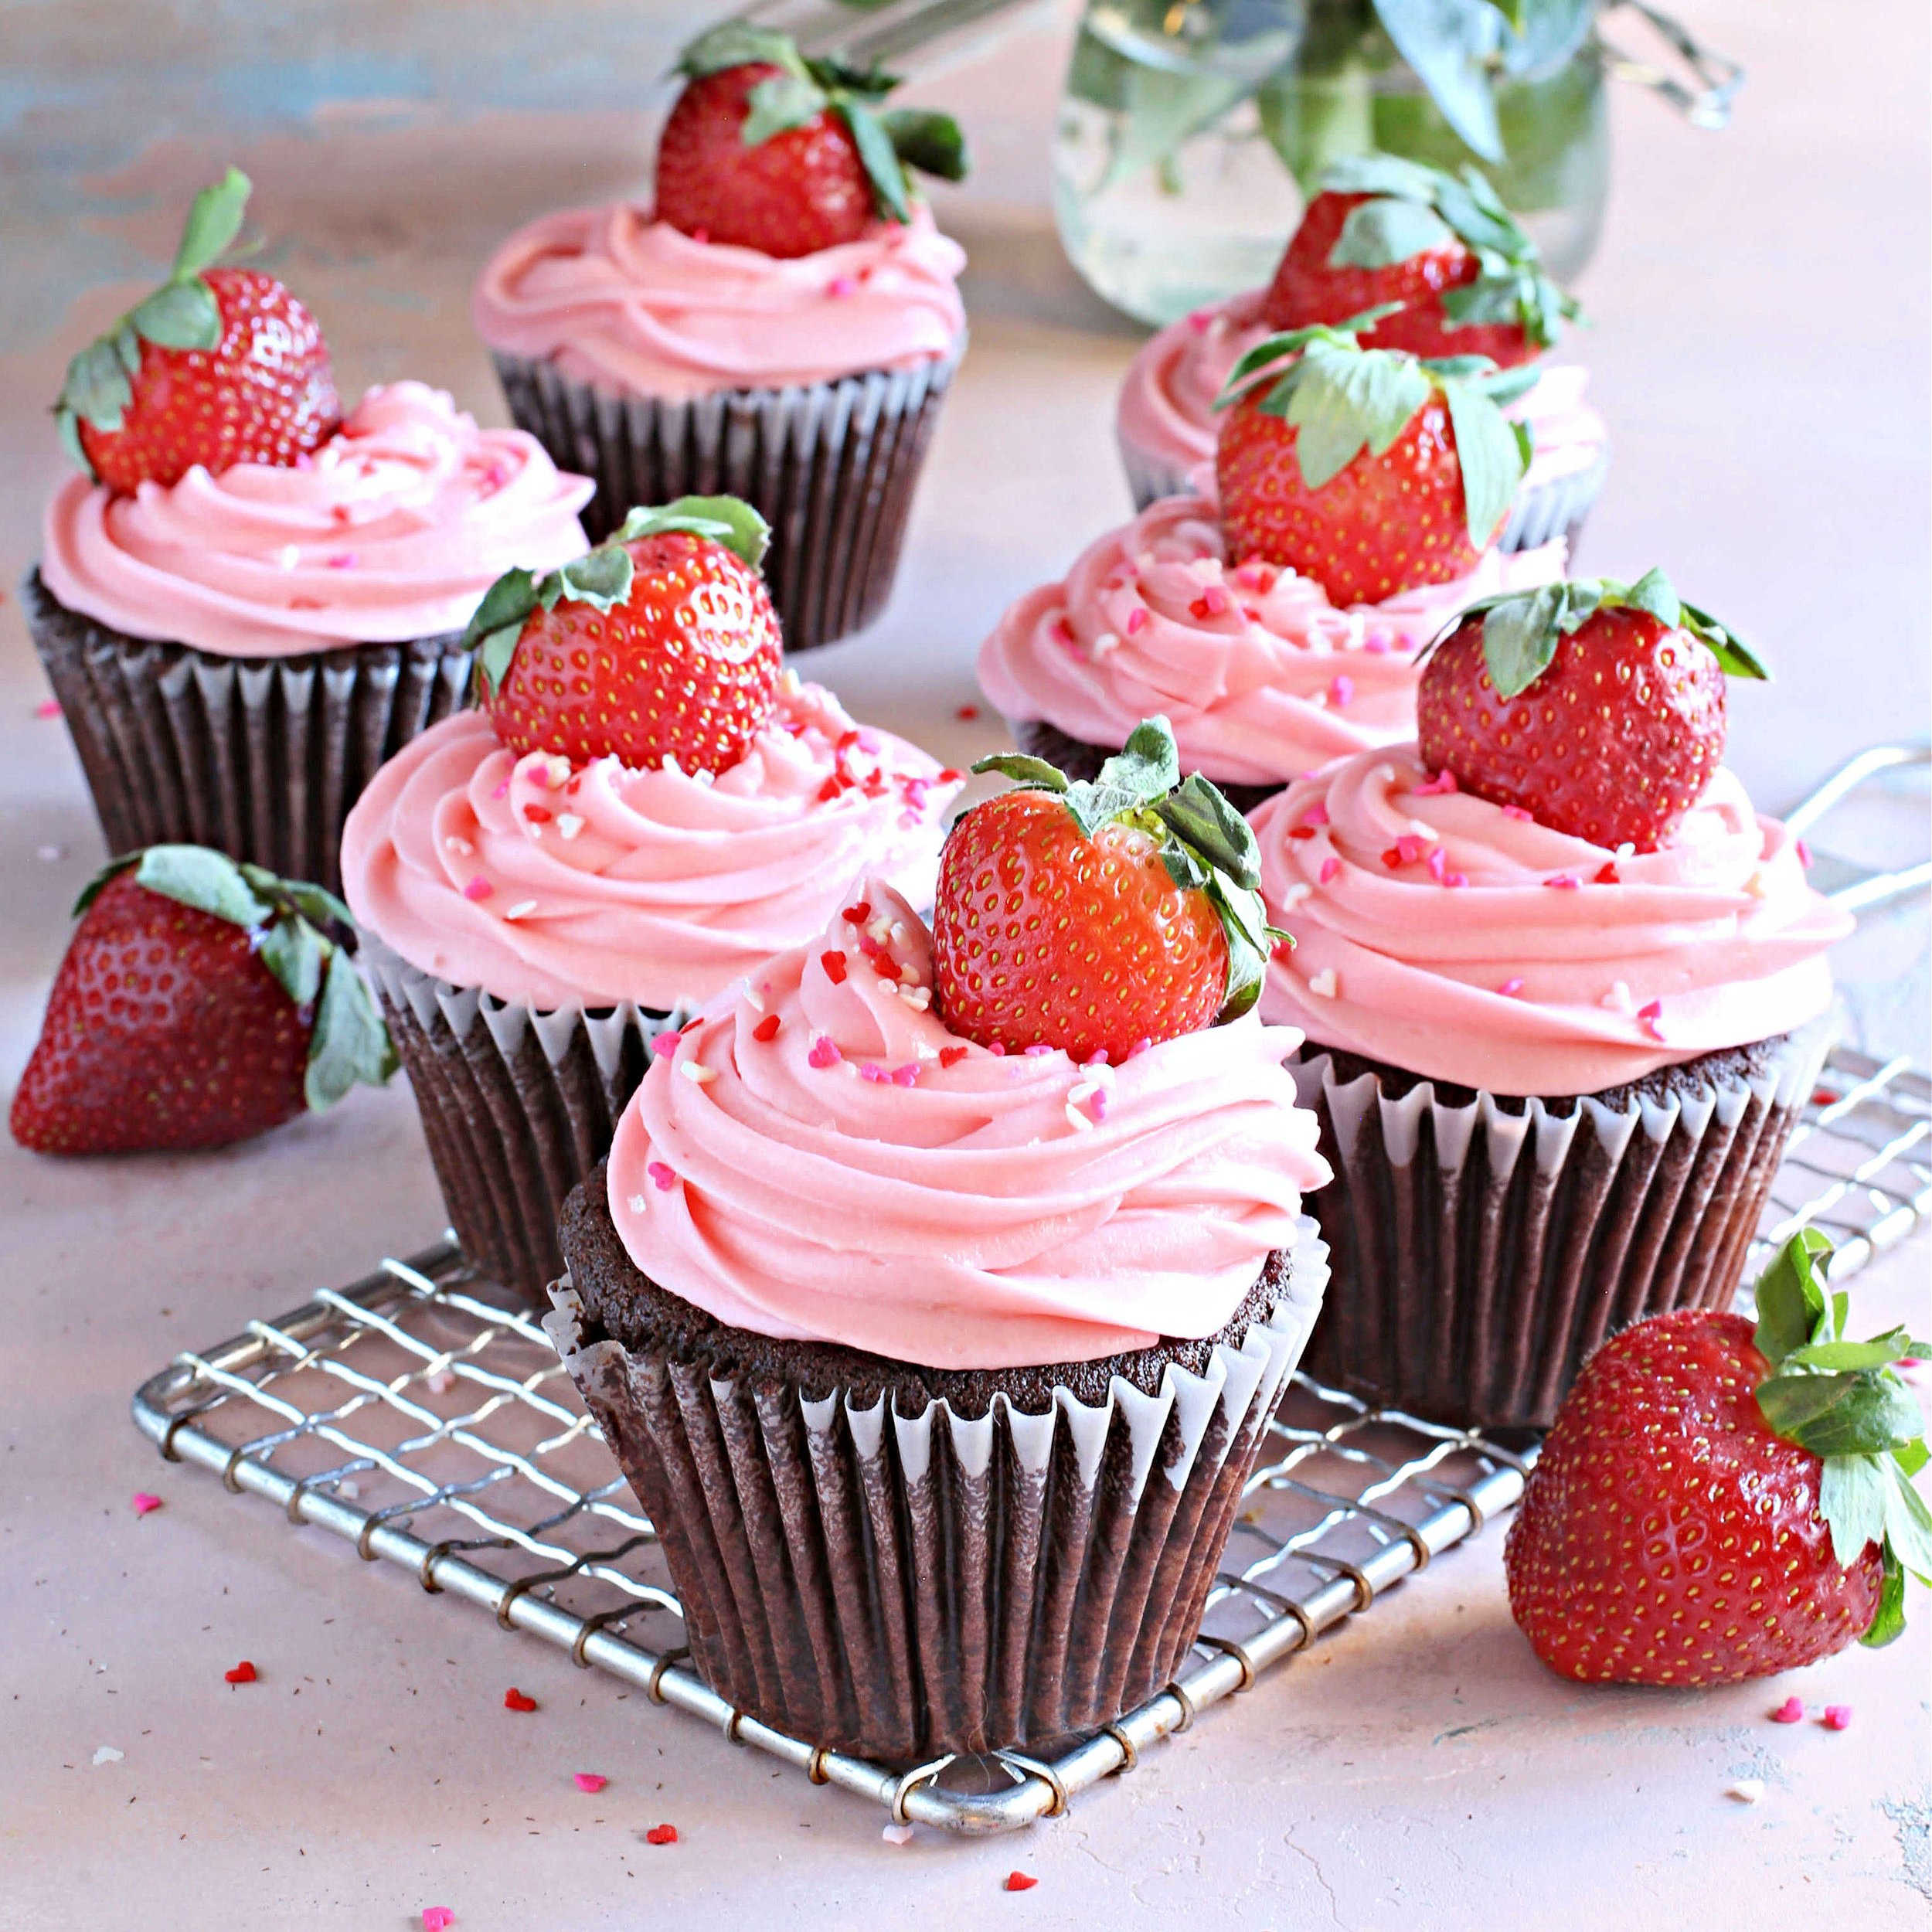 Chocolate Cupcakes with Strawberry Cream Cheese Frosting.jpg